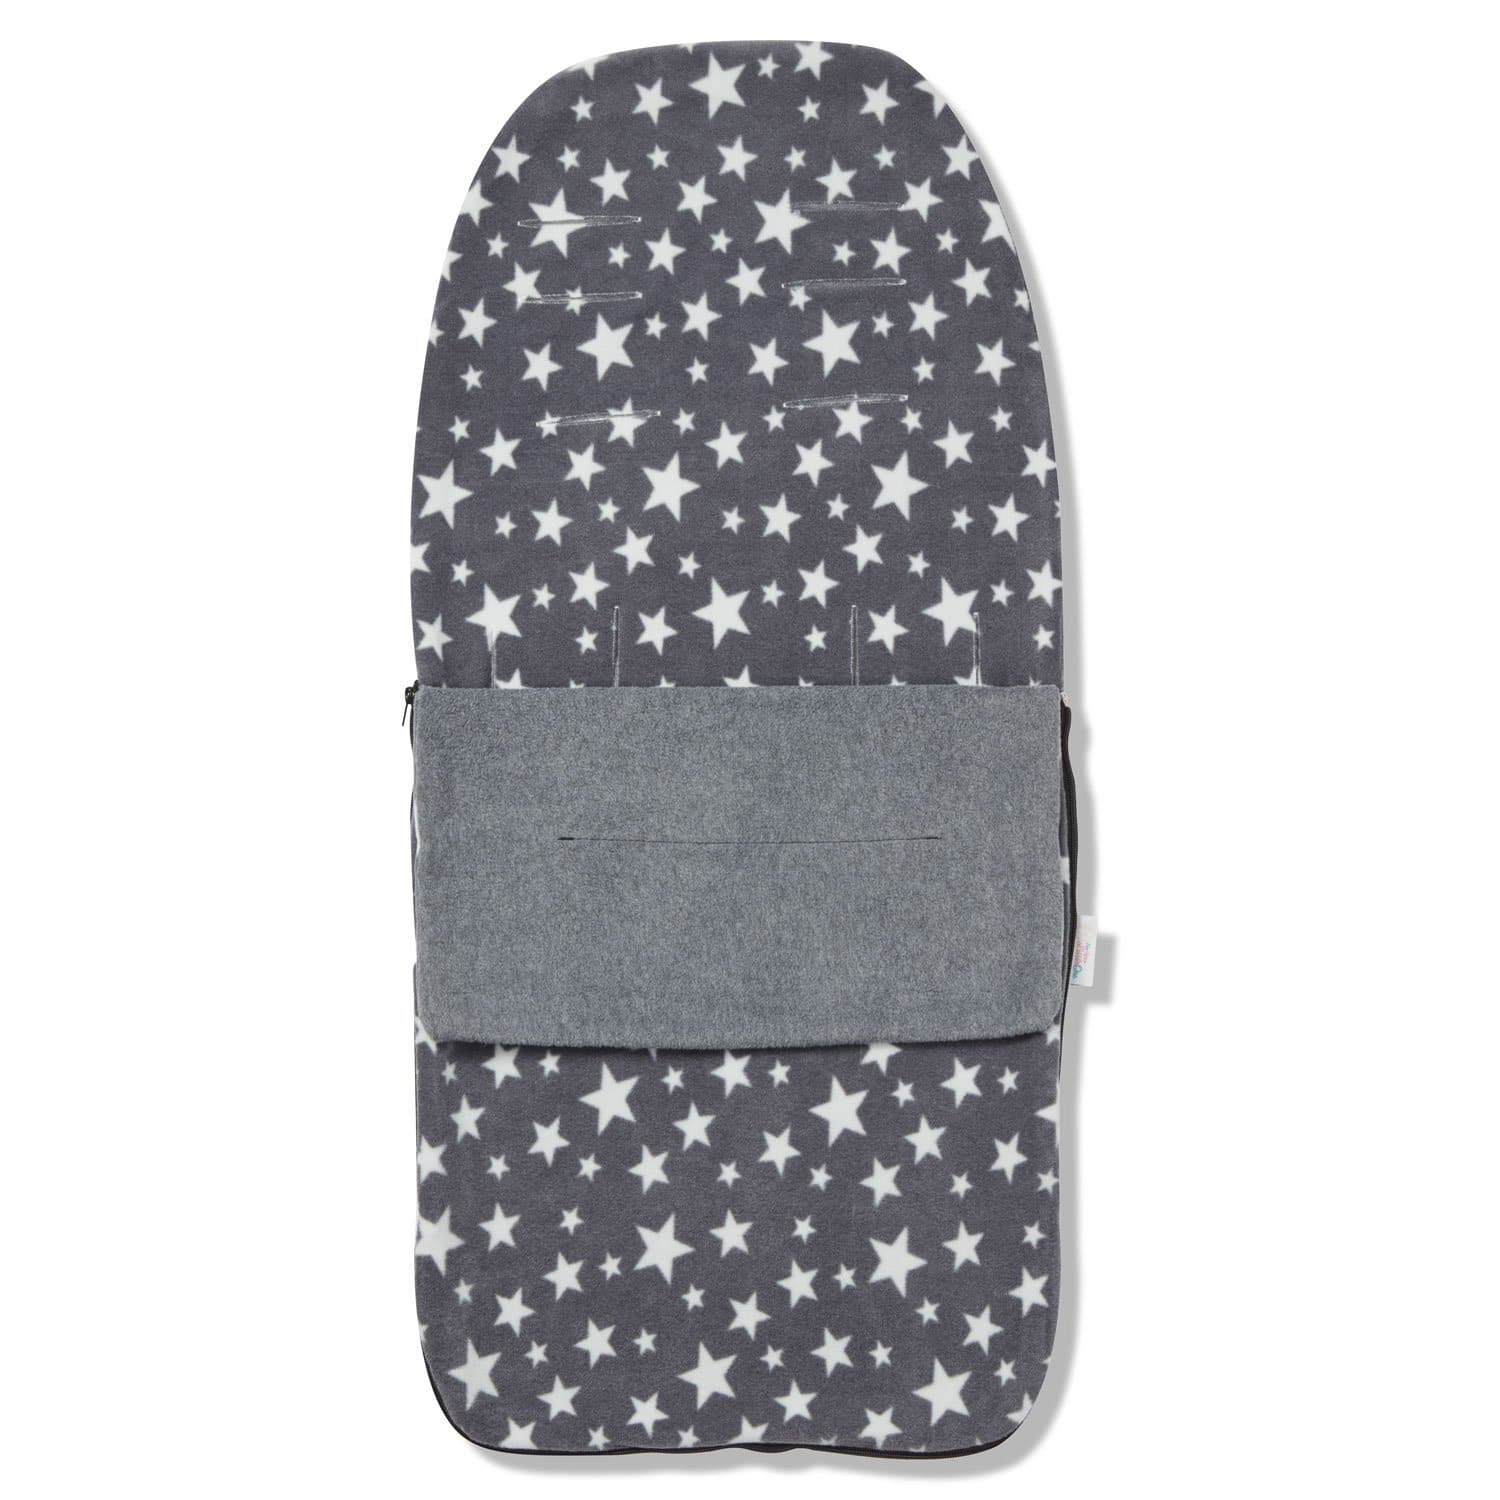 Universal Snuggle Buggy Summer Footmuff - Fits All Pushchairs / Prams And Buggies - Grey Star | For Your Little One